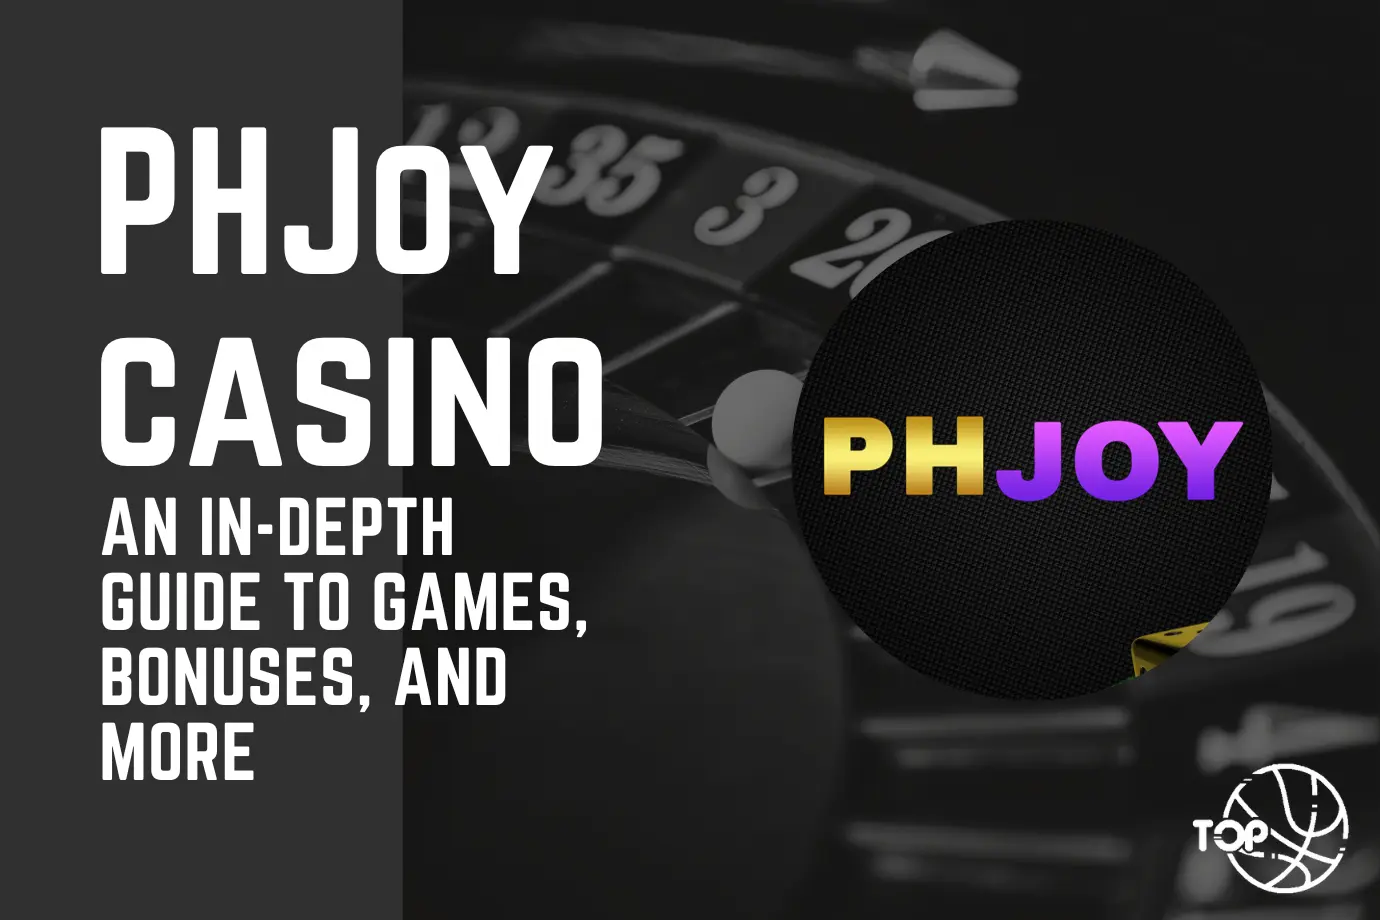 PHJoy: An In-Depth Guide to Games, Bonuses, and More